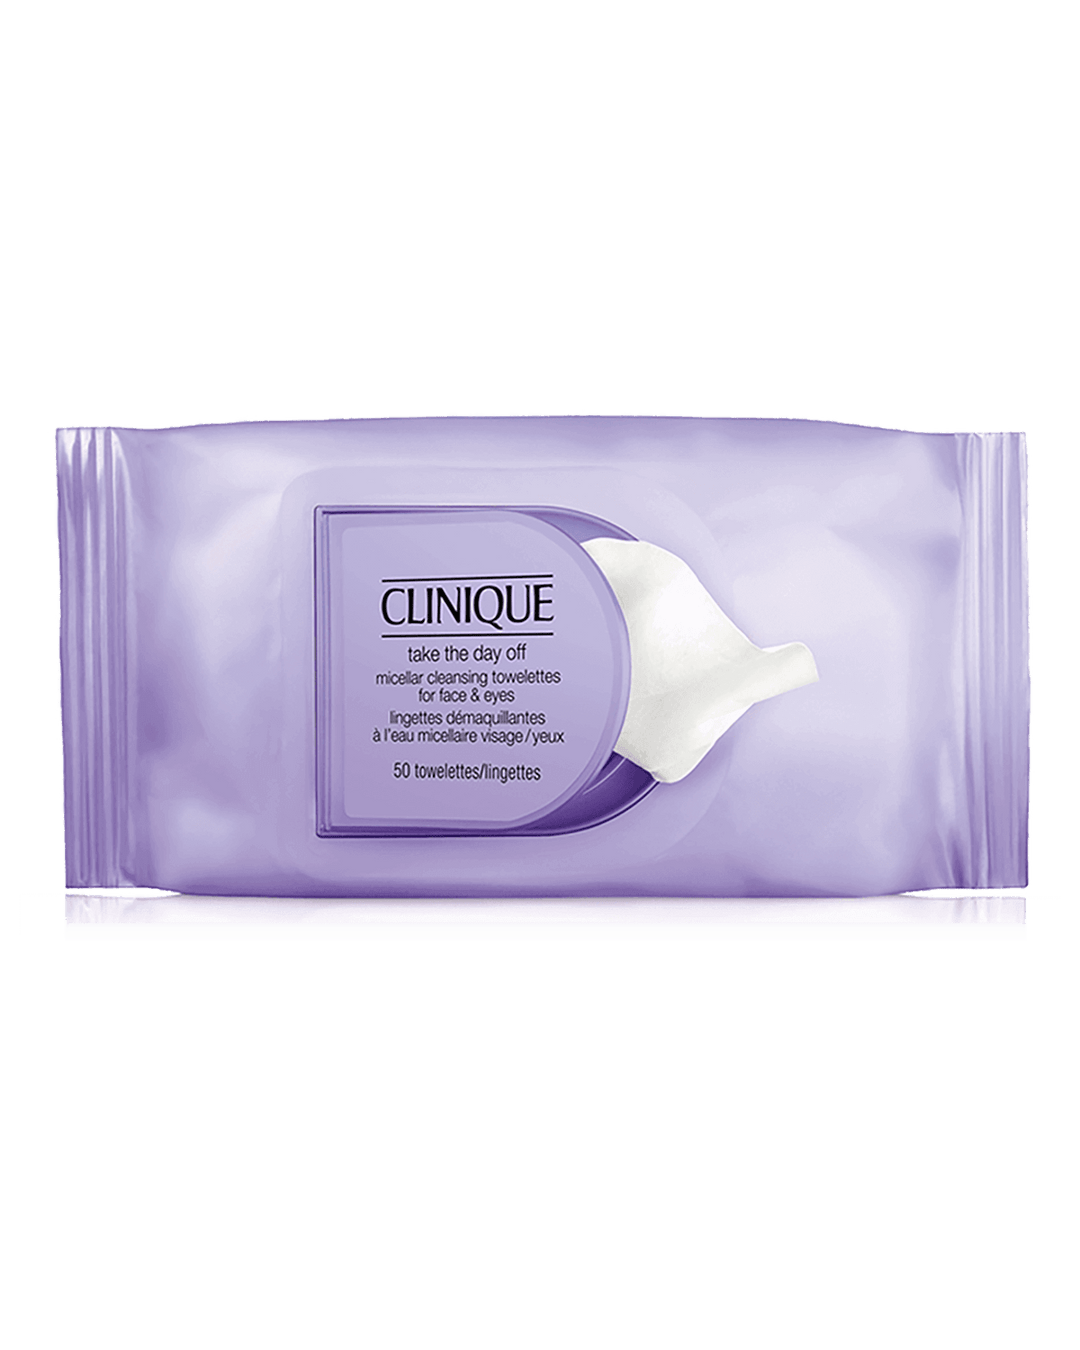 Take the Day Off™ Micellar Cleansing Towelettes for Face & Eyes.